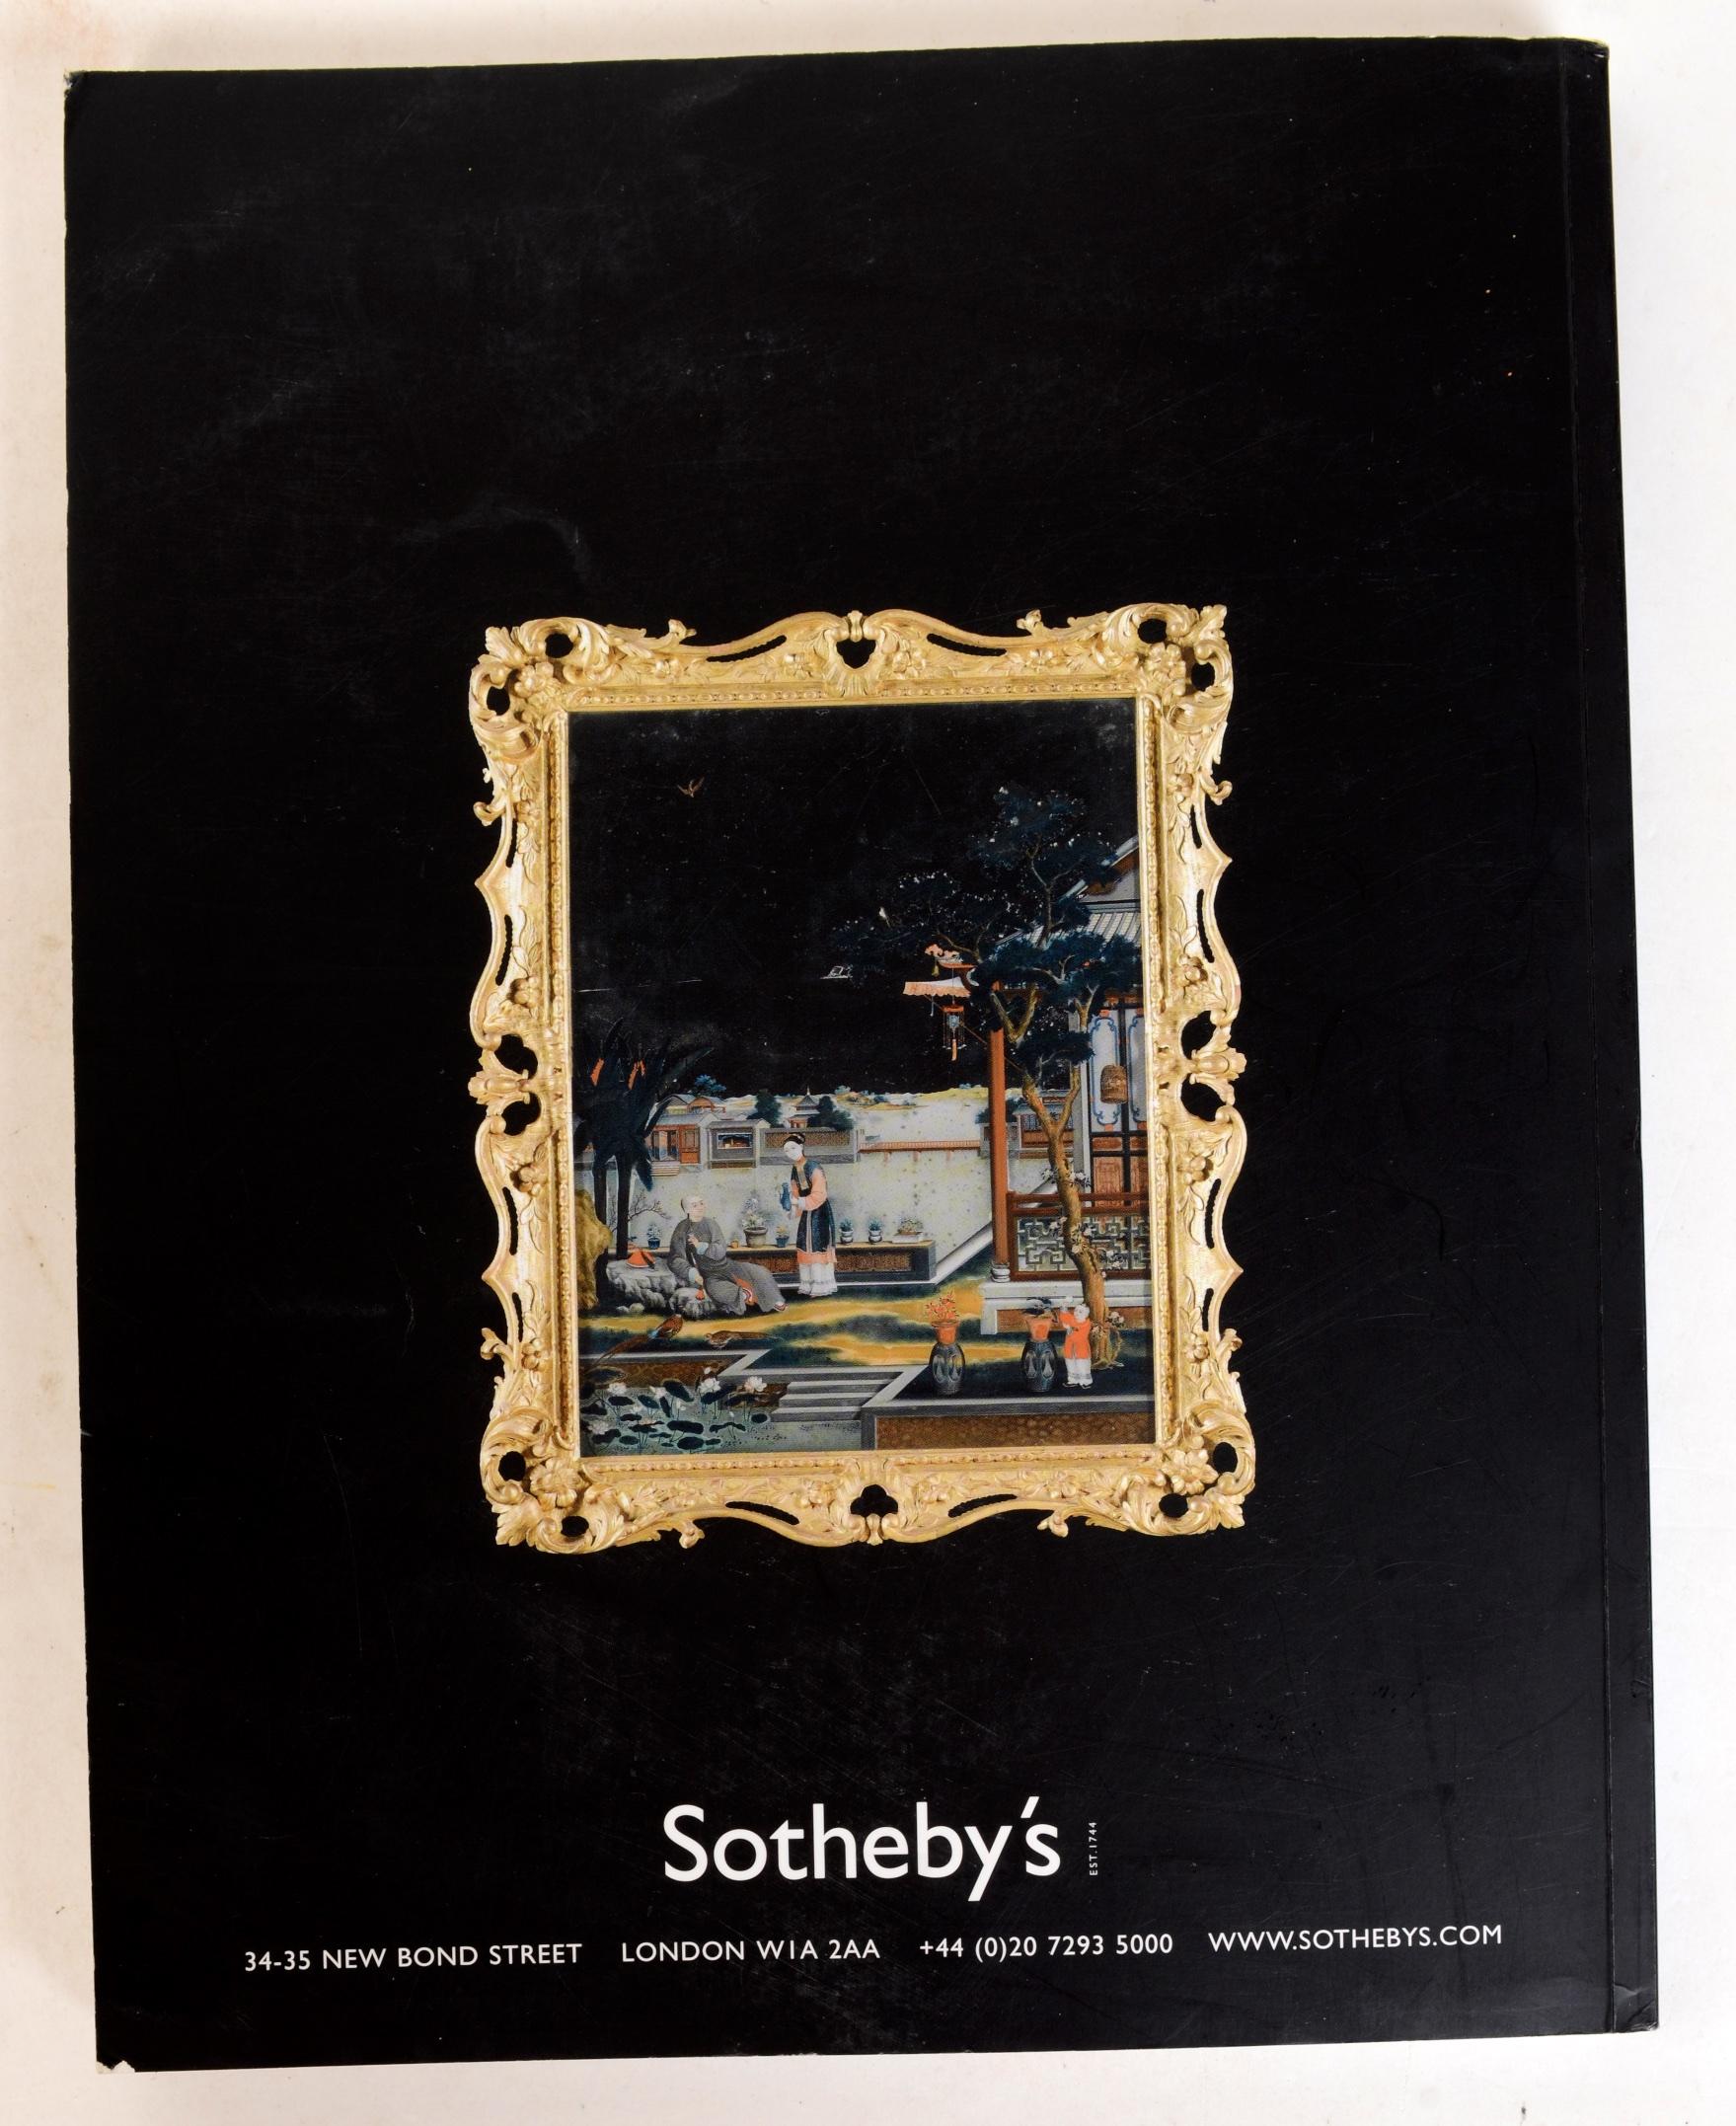 Sotheby's: Important English Furniture including the Horlick Collection, London 5th June 2007. First edition softcover with 256 on 303 pp. all illustrated in color. With results. The sale included a pair of magnificent Chinese mirror paintings. The